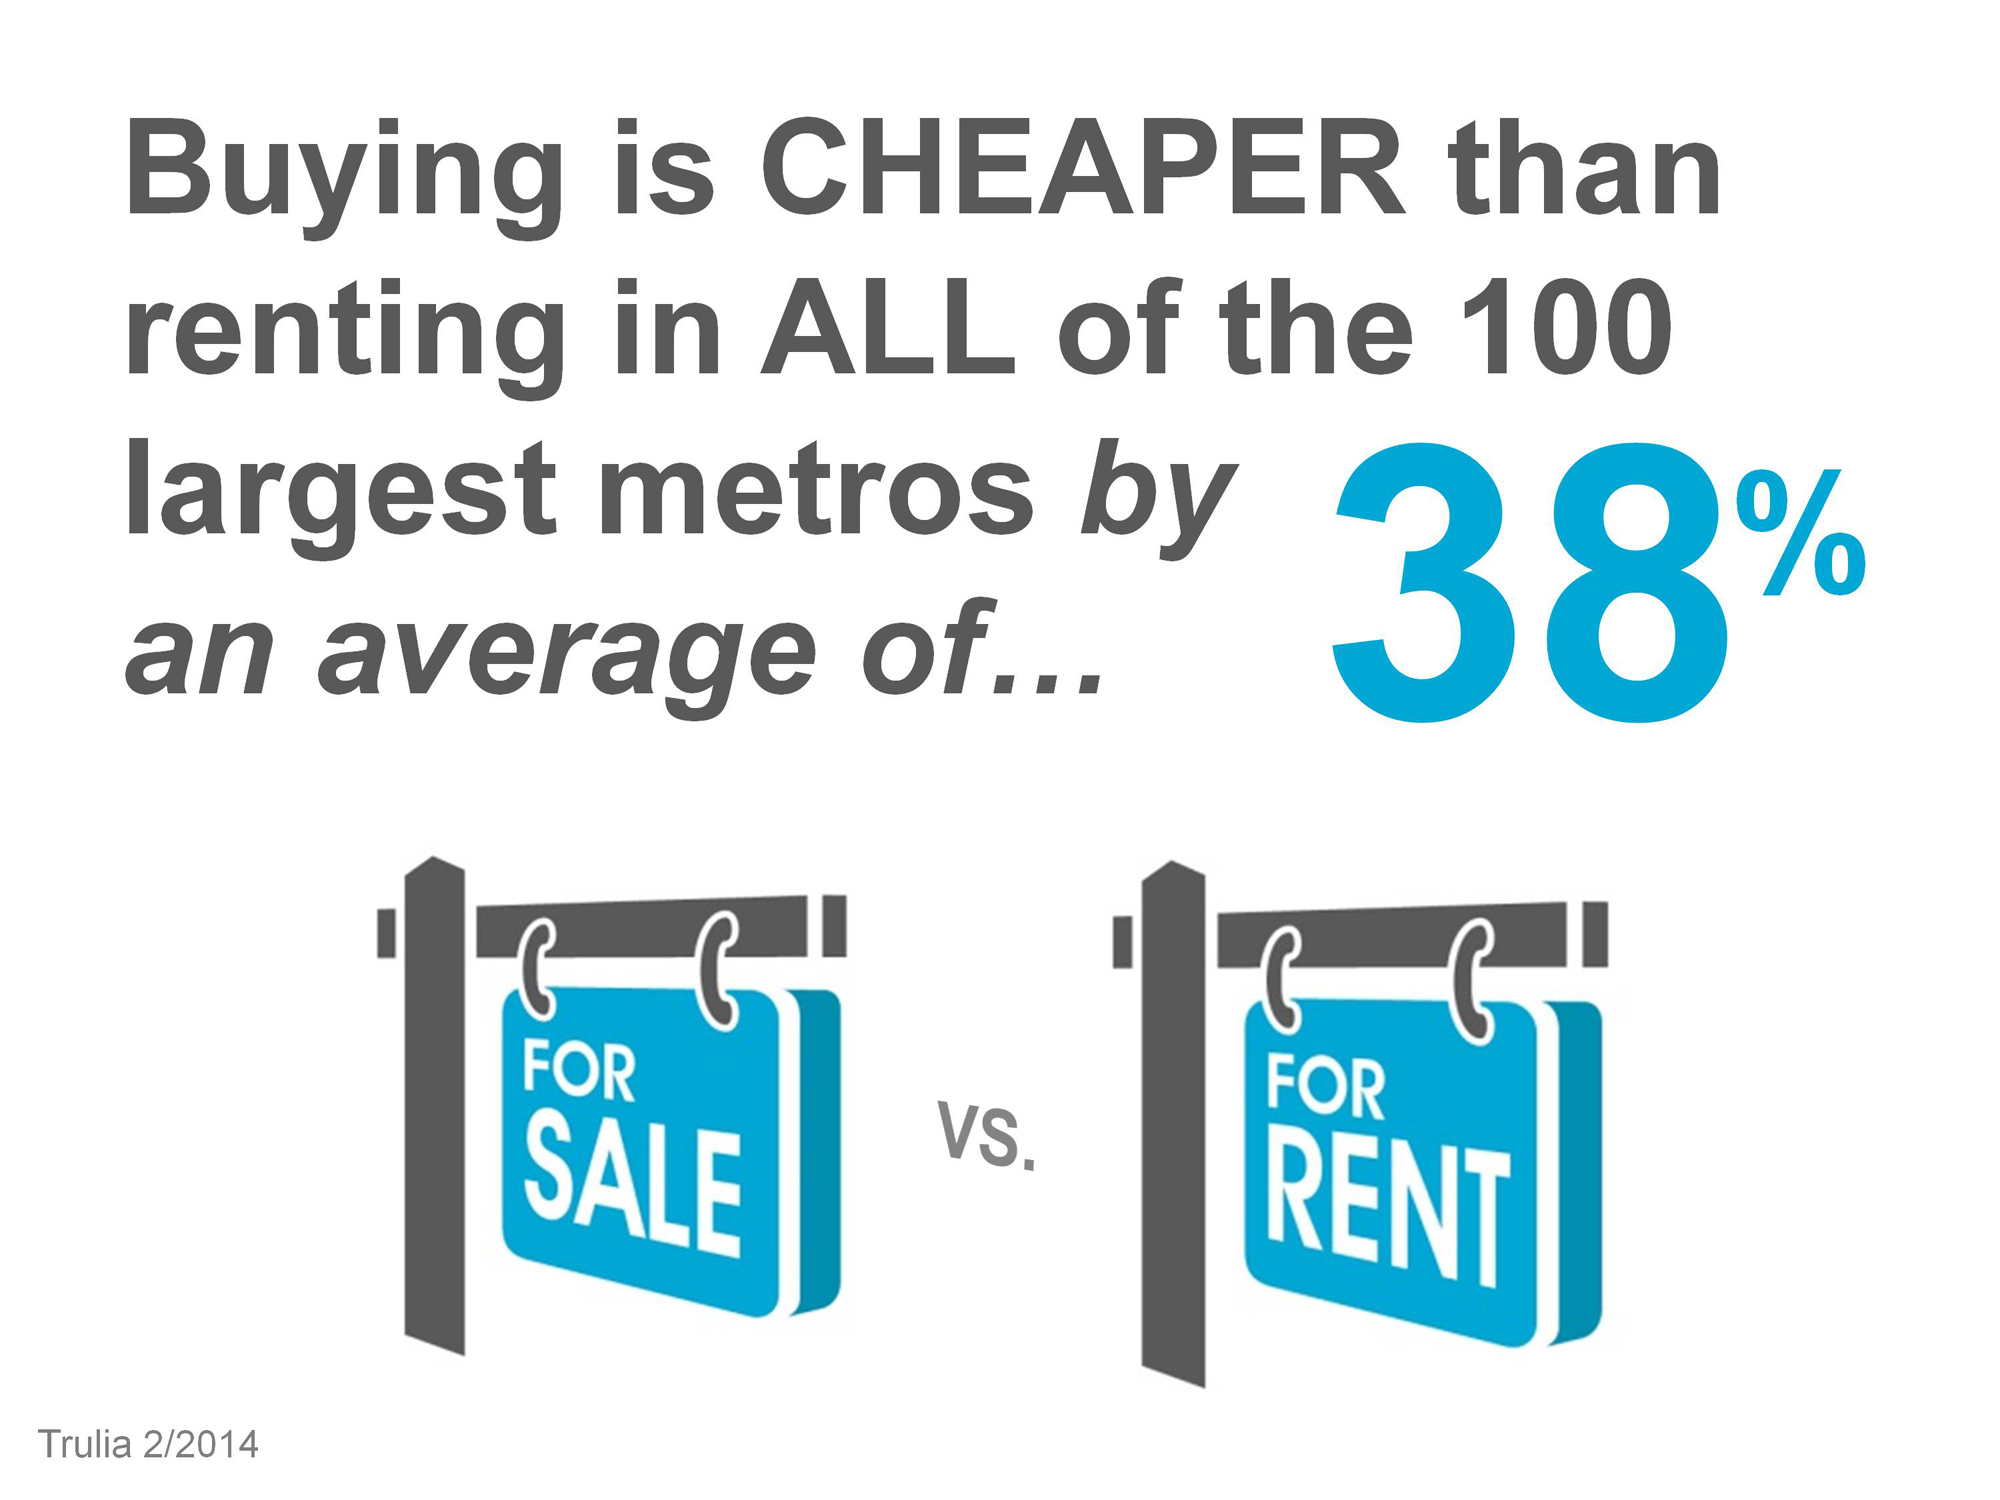 buyer_cheaper_than_renting_march2014-22_2000